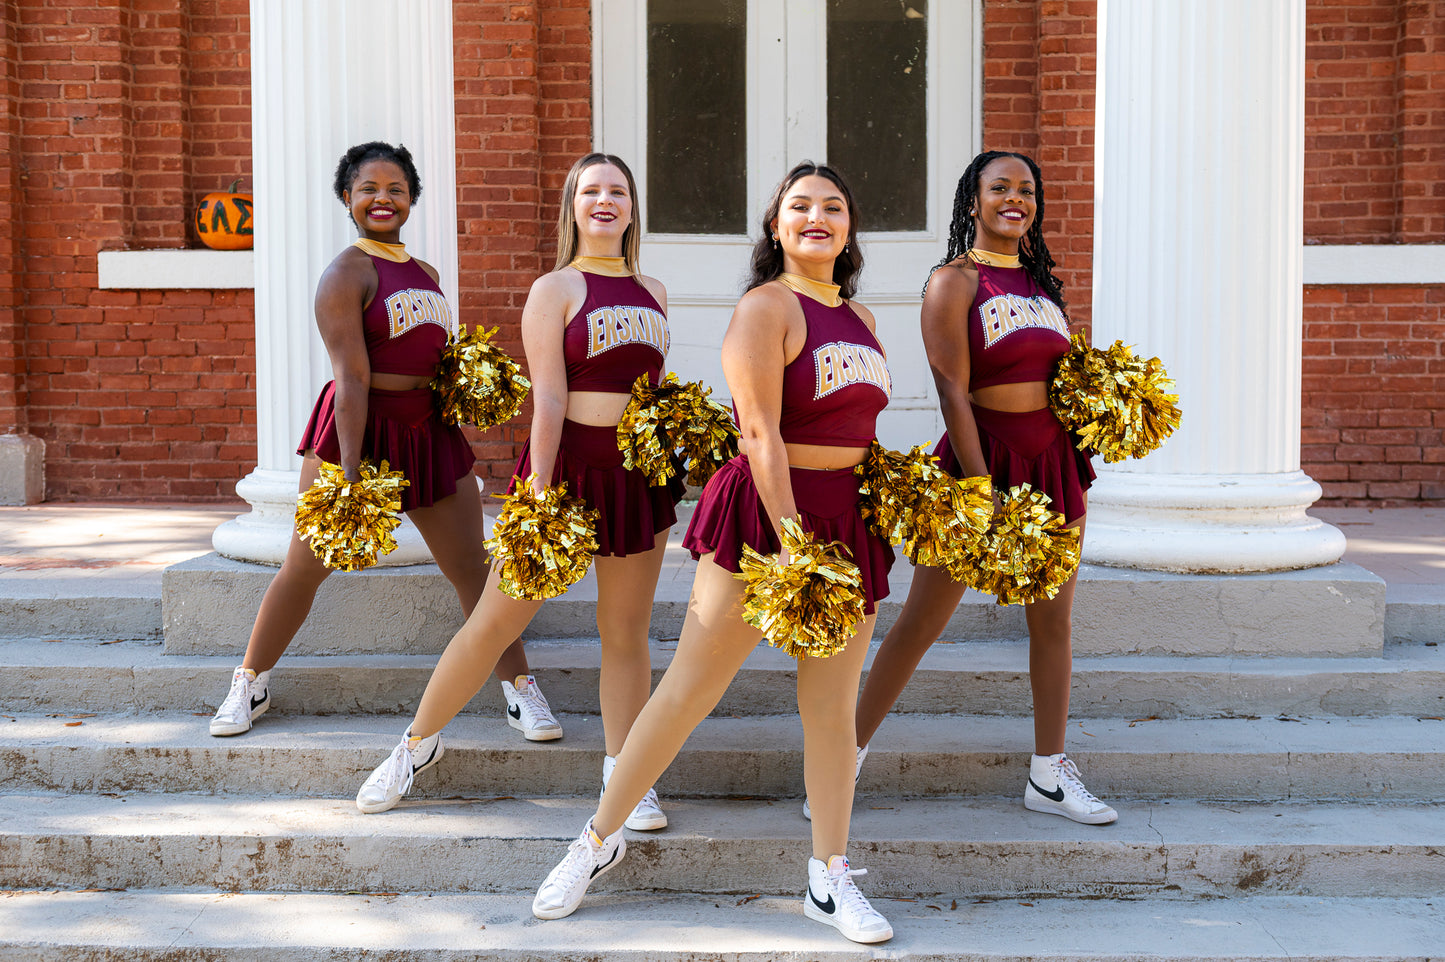 Four members of the cheer team pose on the steps of the Euphie building at Erskine